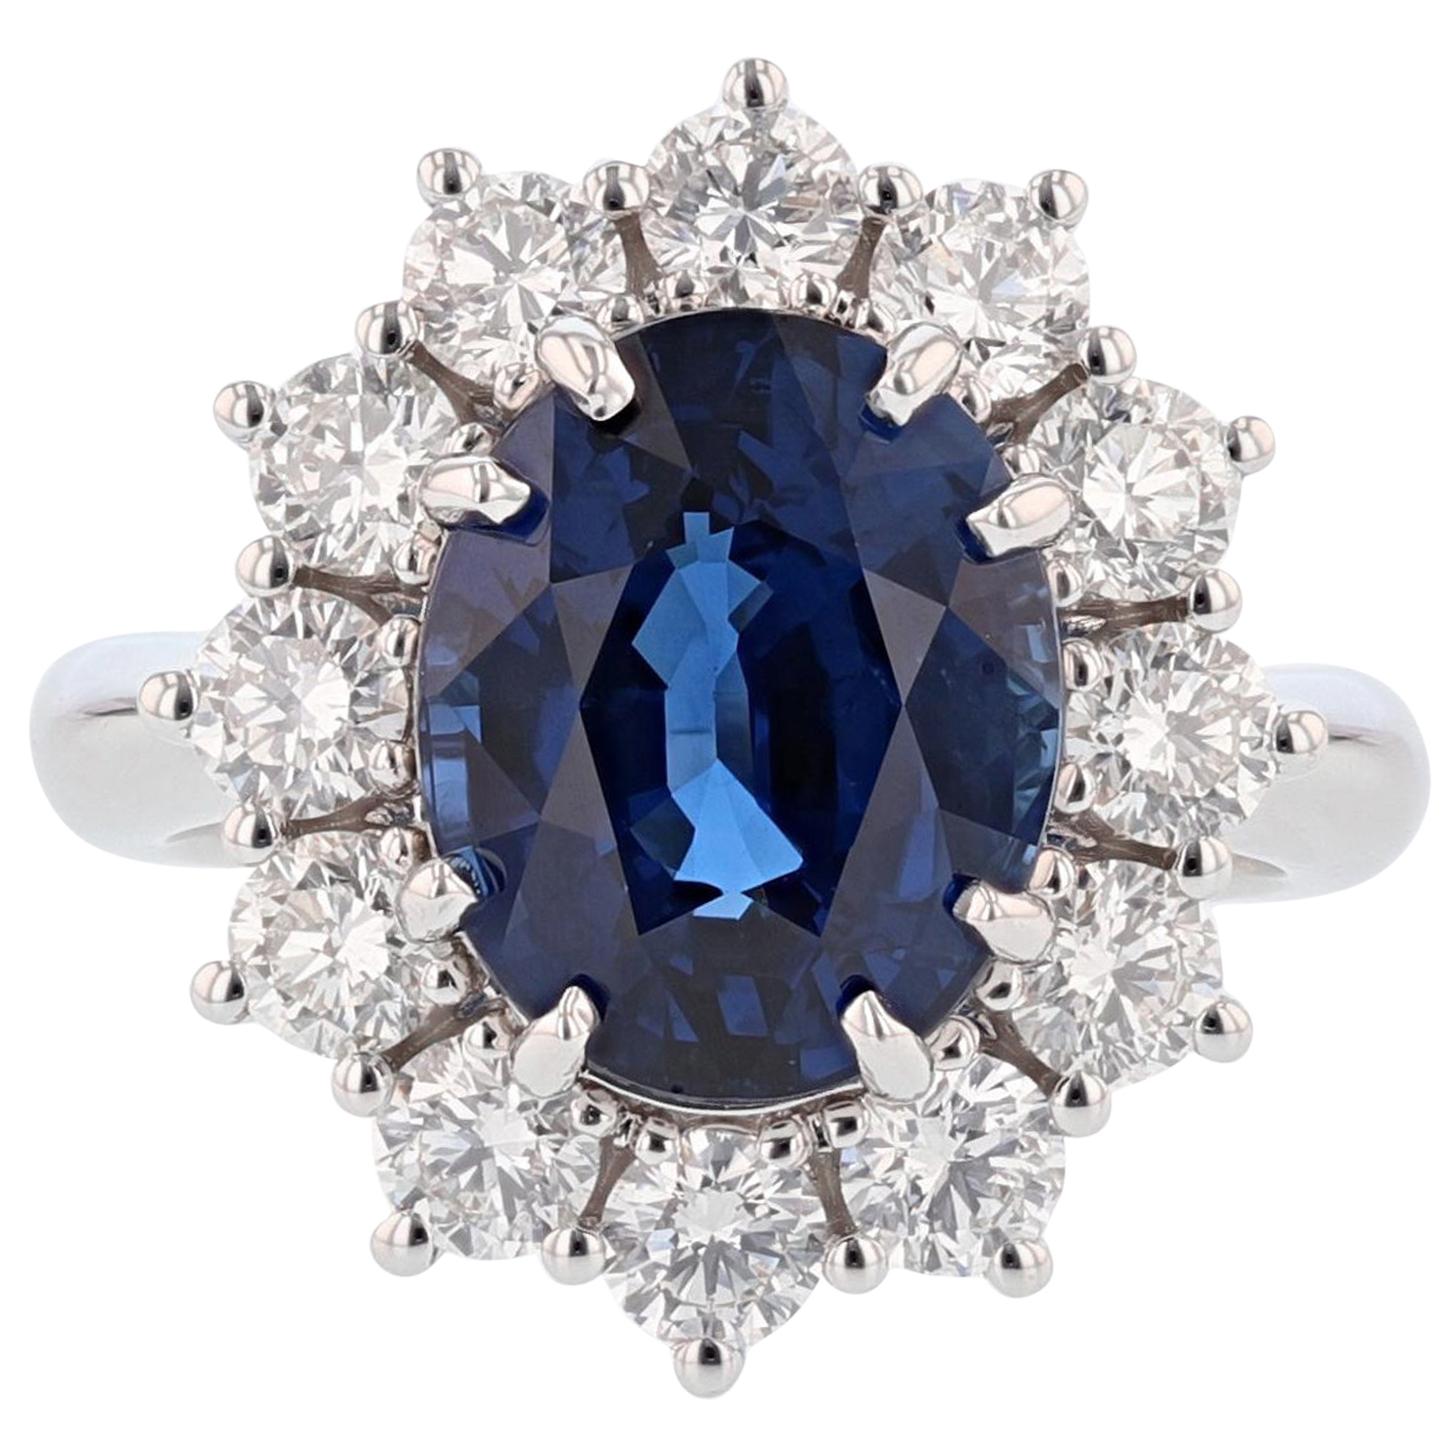 Nazarelle 18K Gold 6.46ct GRS Certified Vivid Blue Sapphire and Diamond Ring